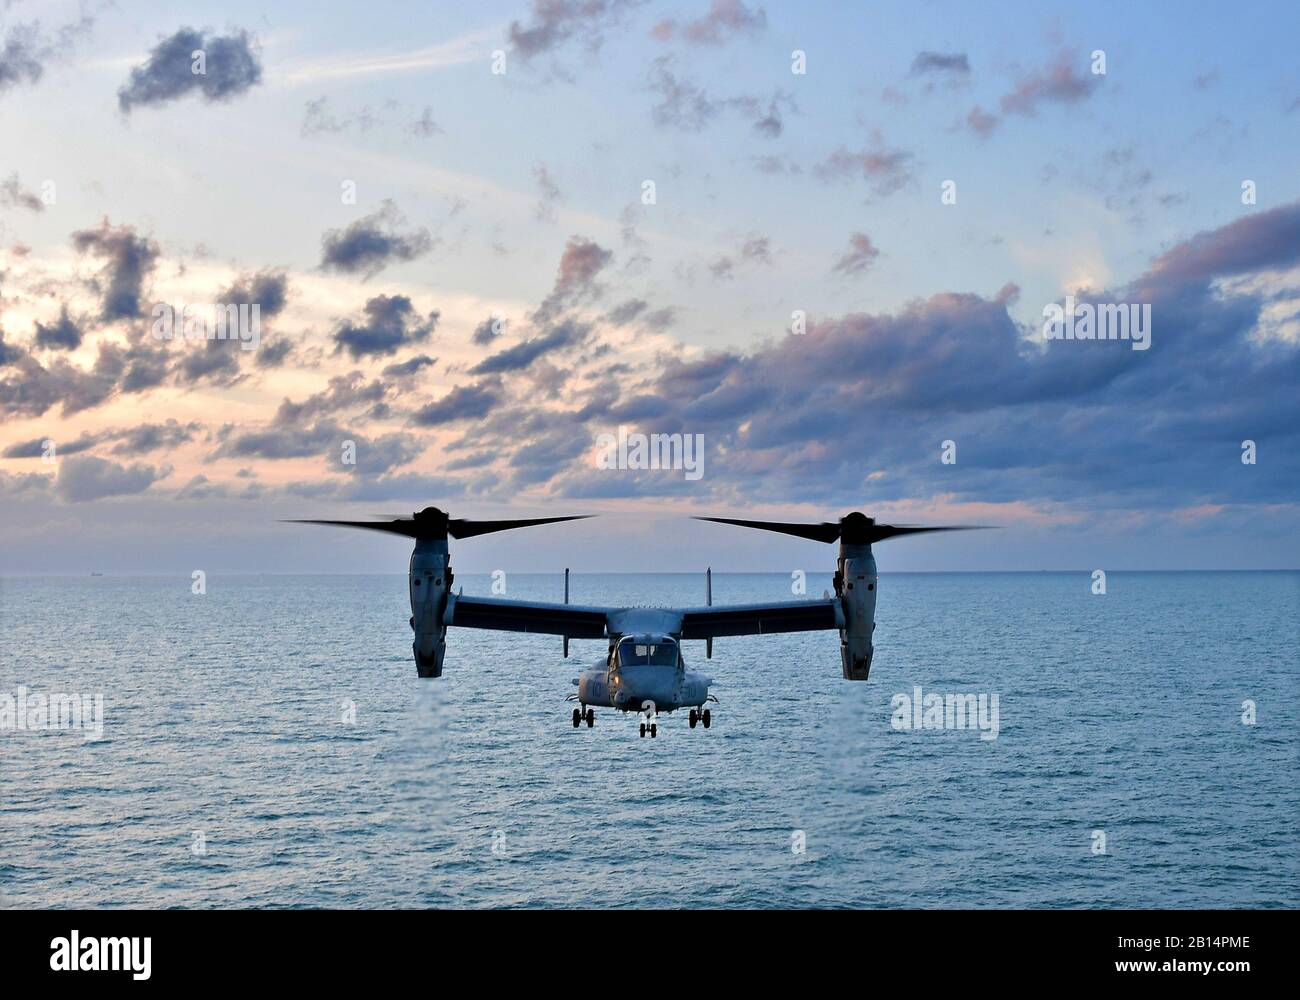 A U.S. Marine Corps MV-22 Osprey, assigned to the 'Flying Tigers' of Marine Medium Tiltrotor Squadron (VMM) 262 reinforced, approaches the amphibious assault ship USS Wasp (LHD 1) in the East China Sea October 21, 2018. The Wasp, flagship of Wasp Amphibious Ready Group, with embarked 31st Marine Expeditionary Unit, is operating in the Indo-Pacific region to enhance interoperability with partners and serve as a ready-response force for any type of contingency. (U.S. Navy photo by Mass Communication Specialist 1st Class Daniel Barker) Stock Photo